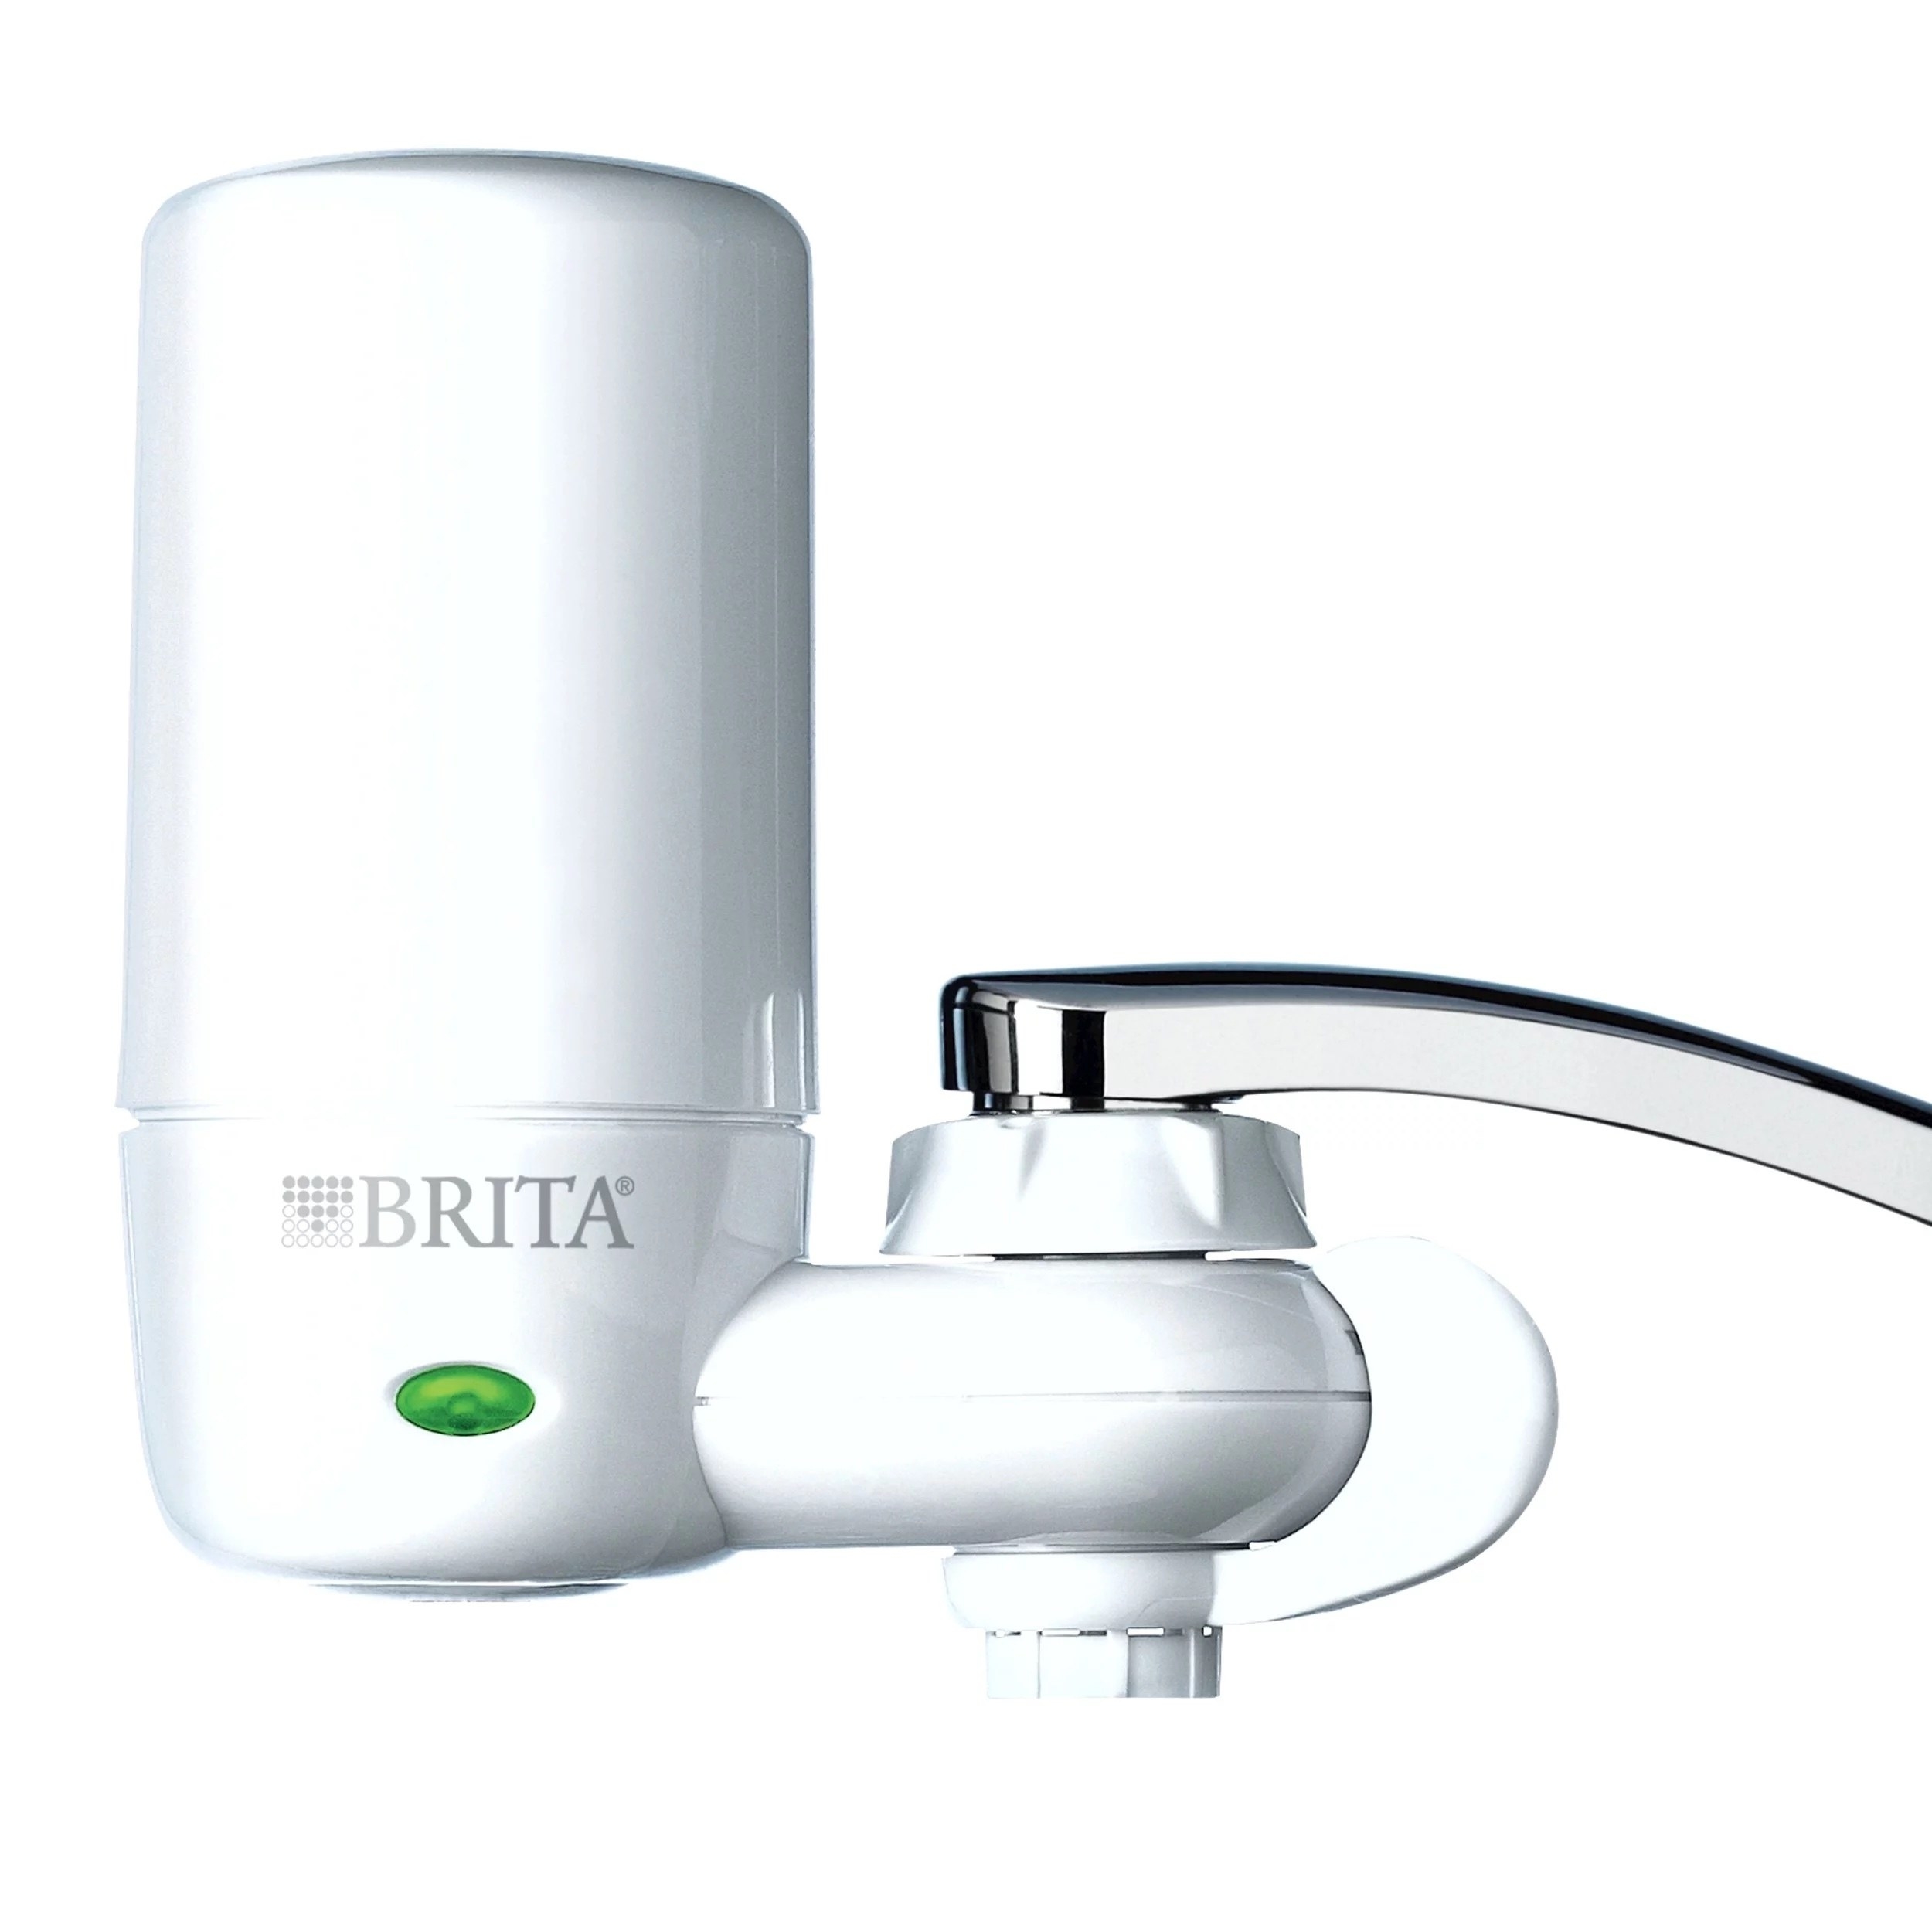 a white Brita filter attachment connect to a sink faucet